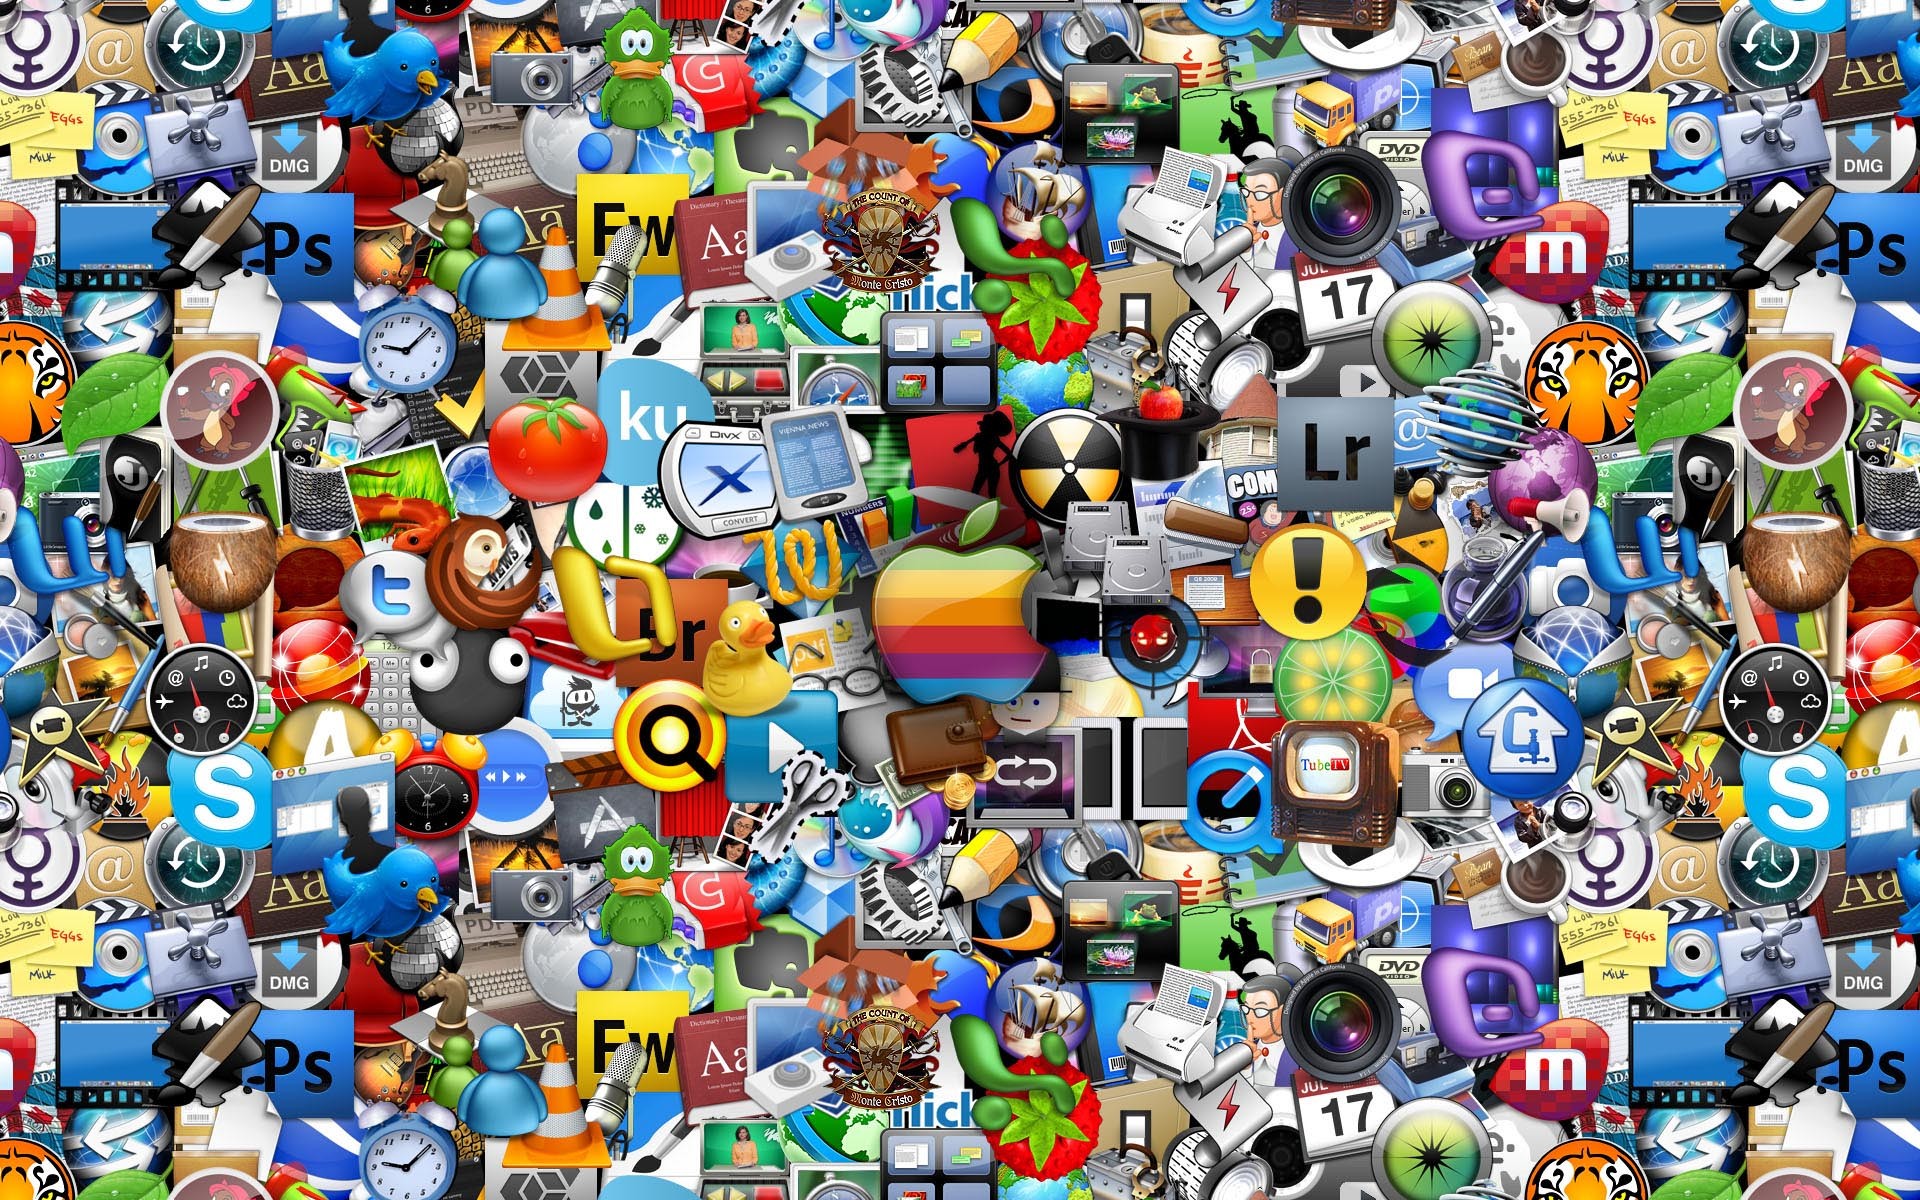 Apps Wallpapers Mac Apps Myspace Backgrounds Mac Apps Backgrounds